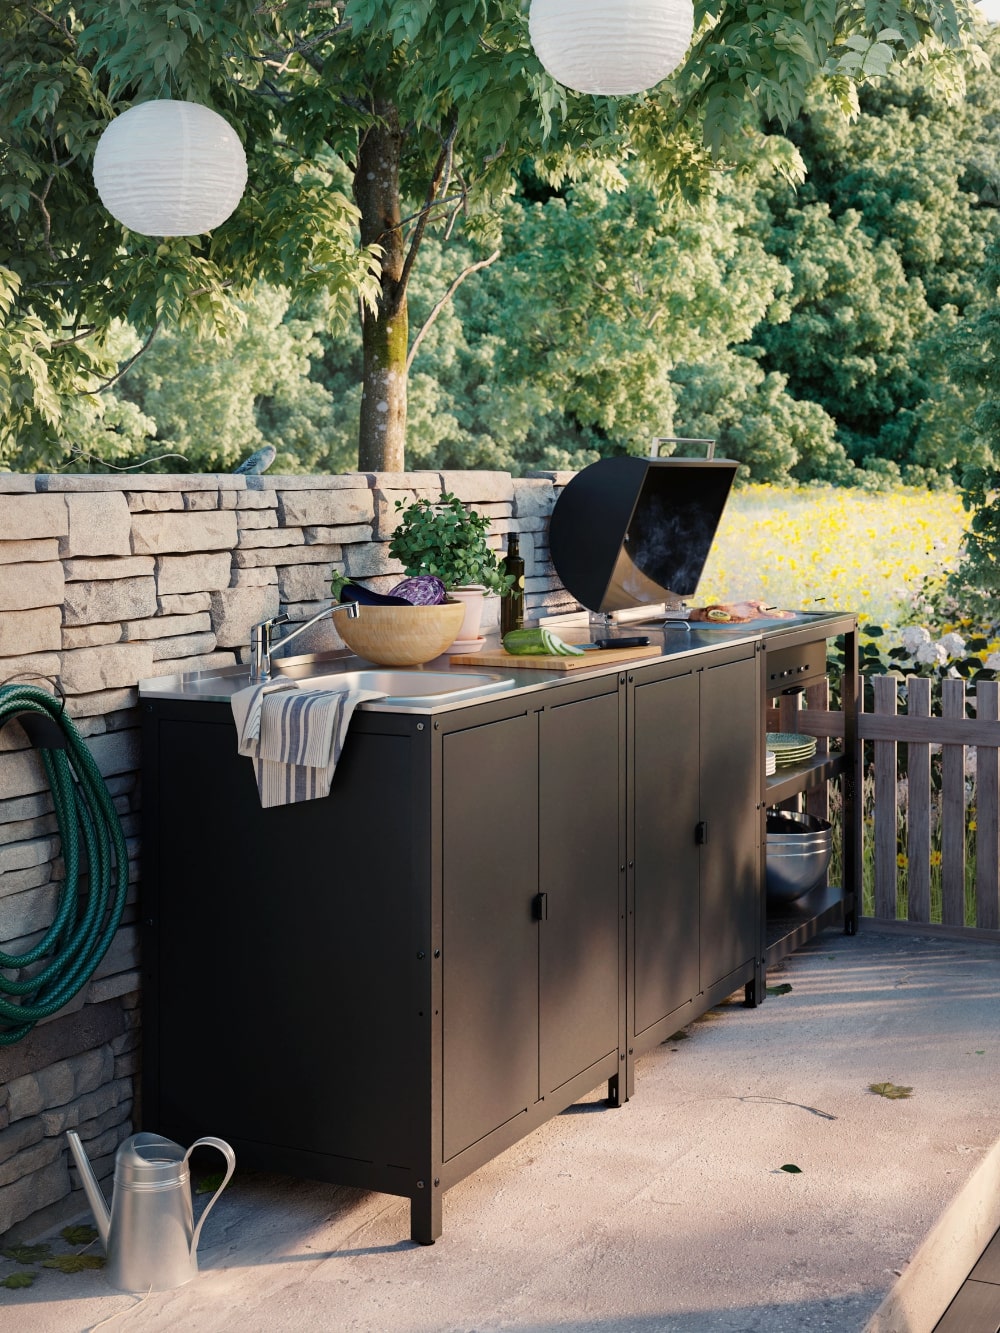 Outdoor Kitchen to Cook in the Backyard